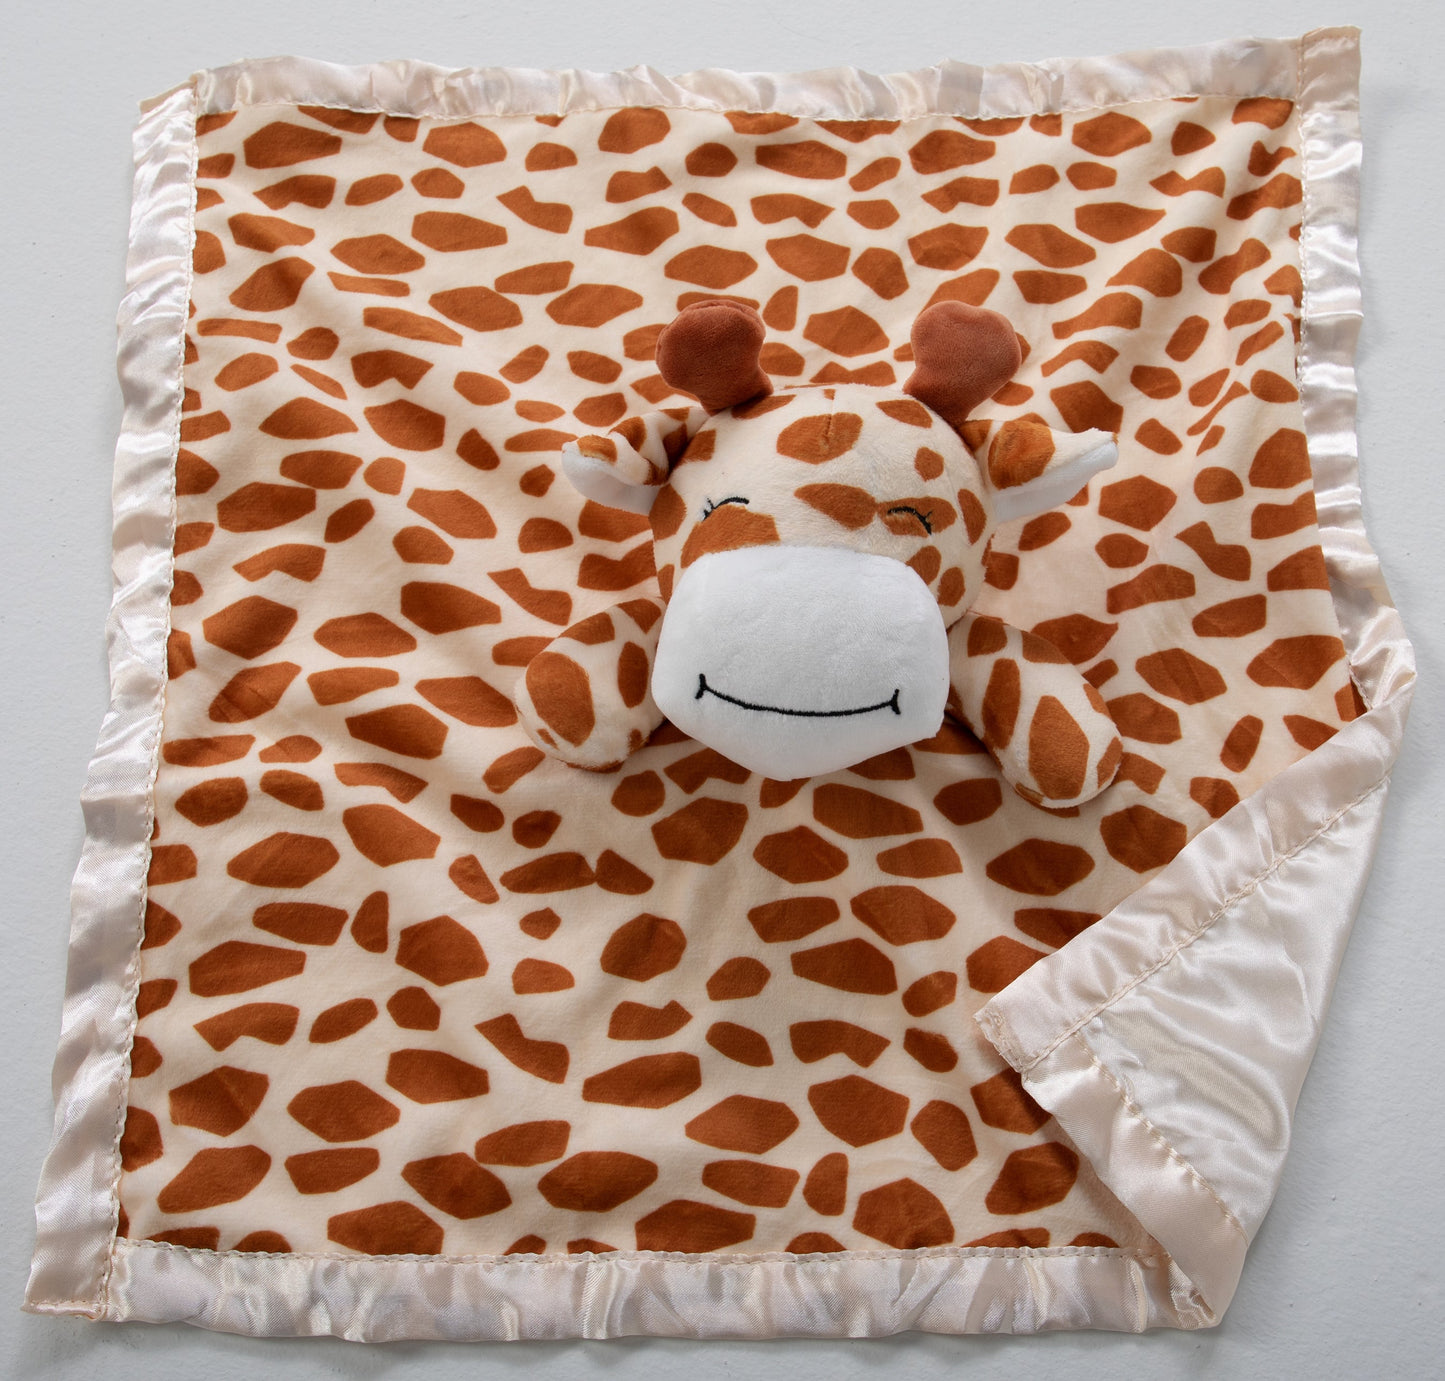 Our adorable stuffed giraffe lovey and security blanket companion is the perfect cuddly friend for your baby. Crafted with love, it's sure to provide comfort and companionship throughout the early years.  Made of soft plush and lined with satin this lovable animal is sure to be your baby's new best friend.